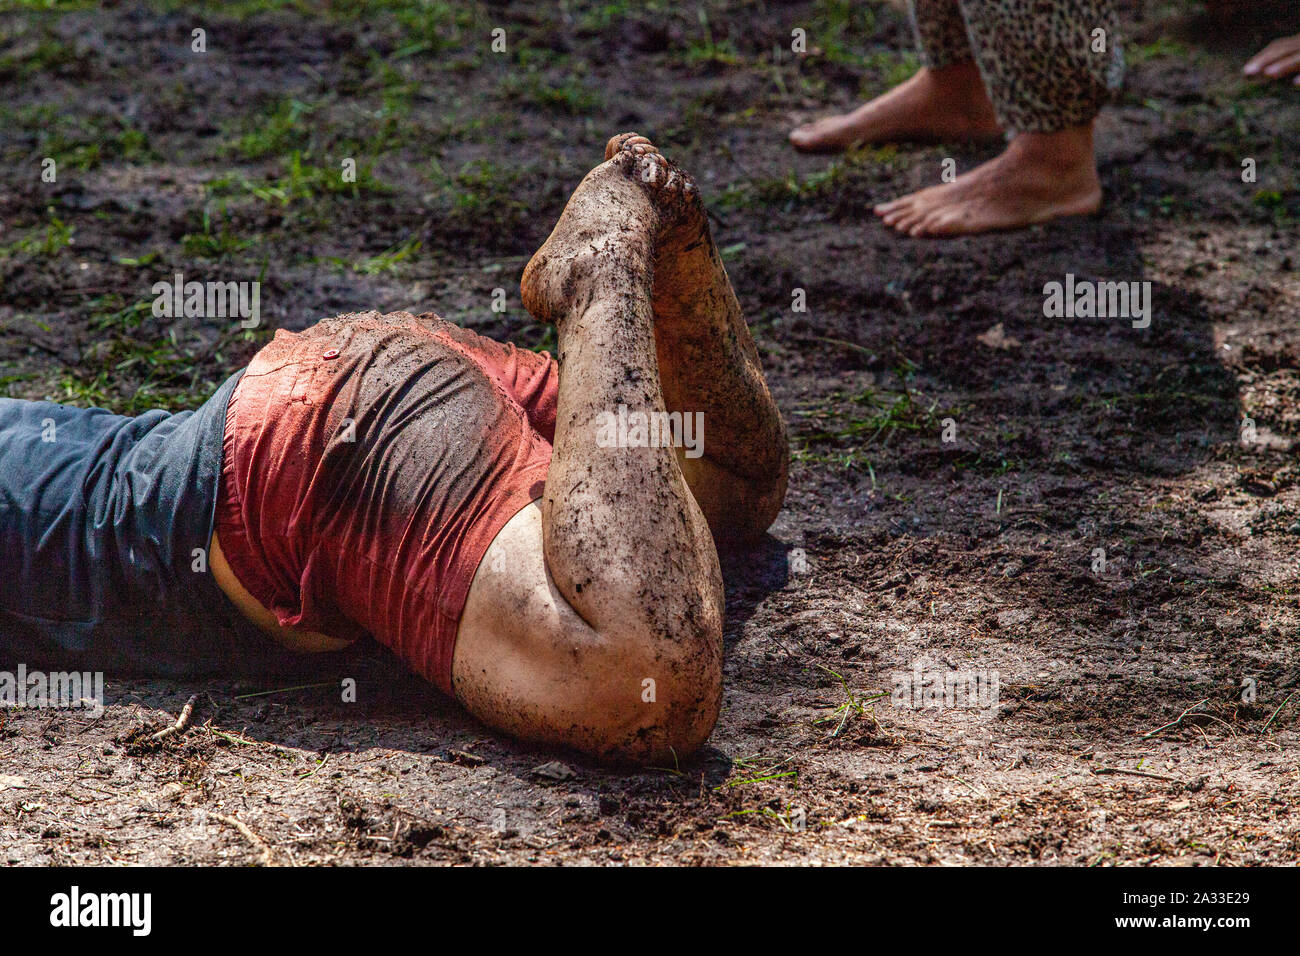 A young woman is seen closeup, laying on her stomach in mud and earth during a celebration of intercultural practices and rituals, with room for copy Stock Photo